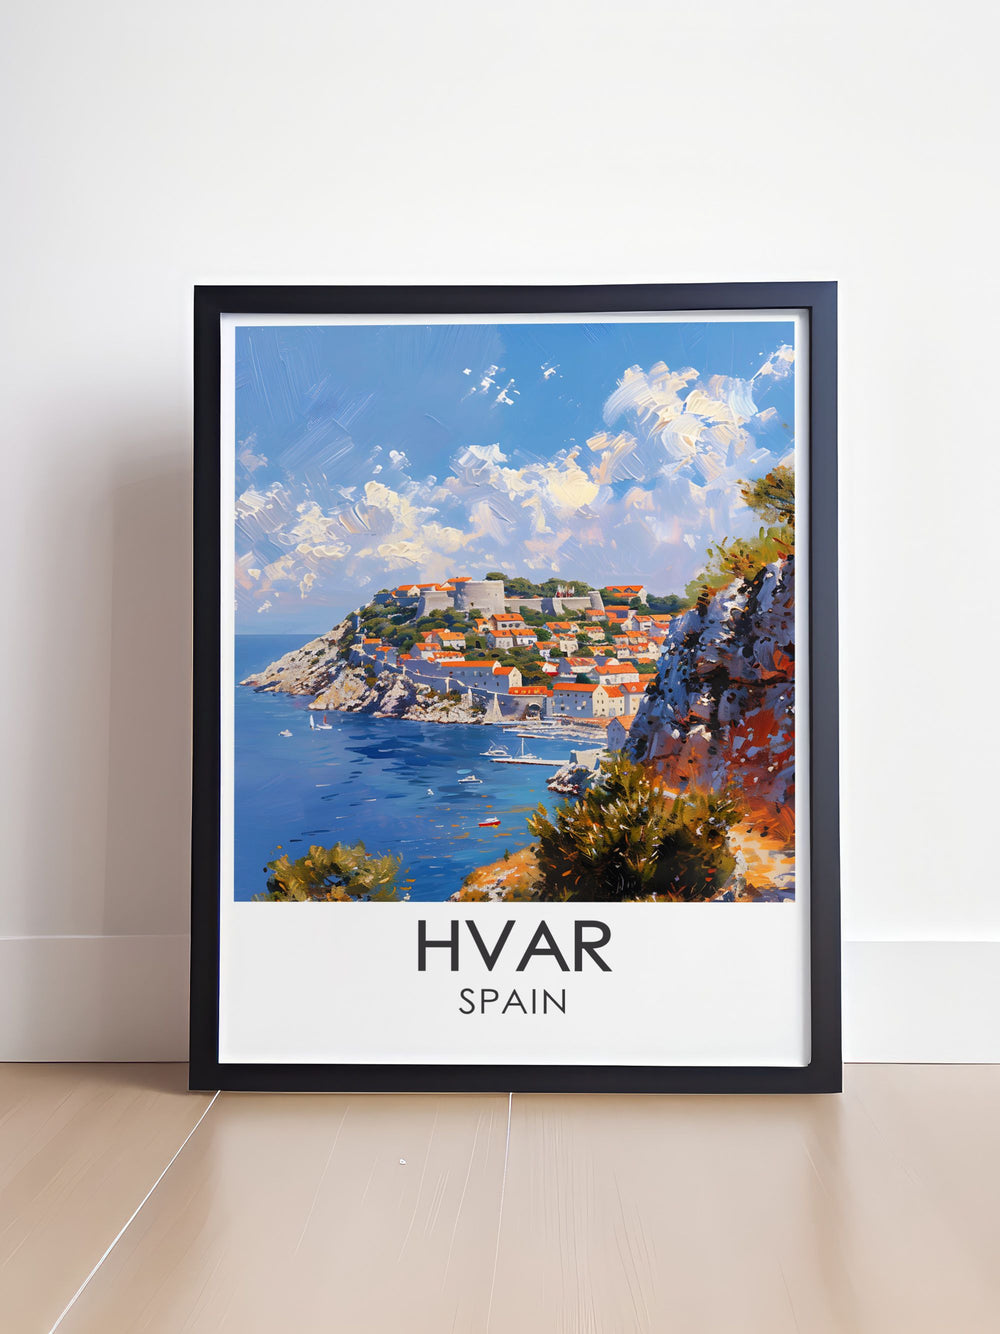 Home decor featuring the vibrant Hvar Harbor, showcasing sleek yachts, traditional fishing boats, and charming waterfront cafes. The picturesque setting, with turquoise waters and a lively atmosphere, makes this print a delightful reminder of Croatias coastal charm.